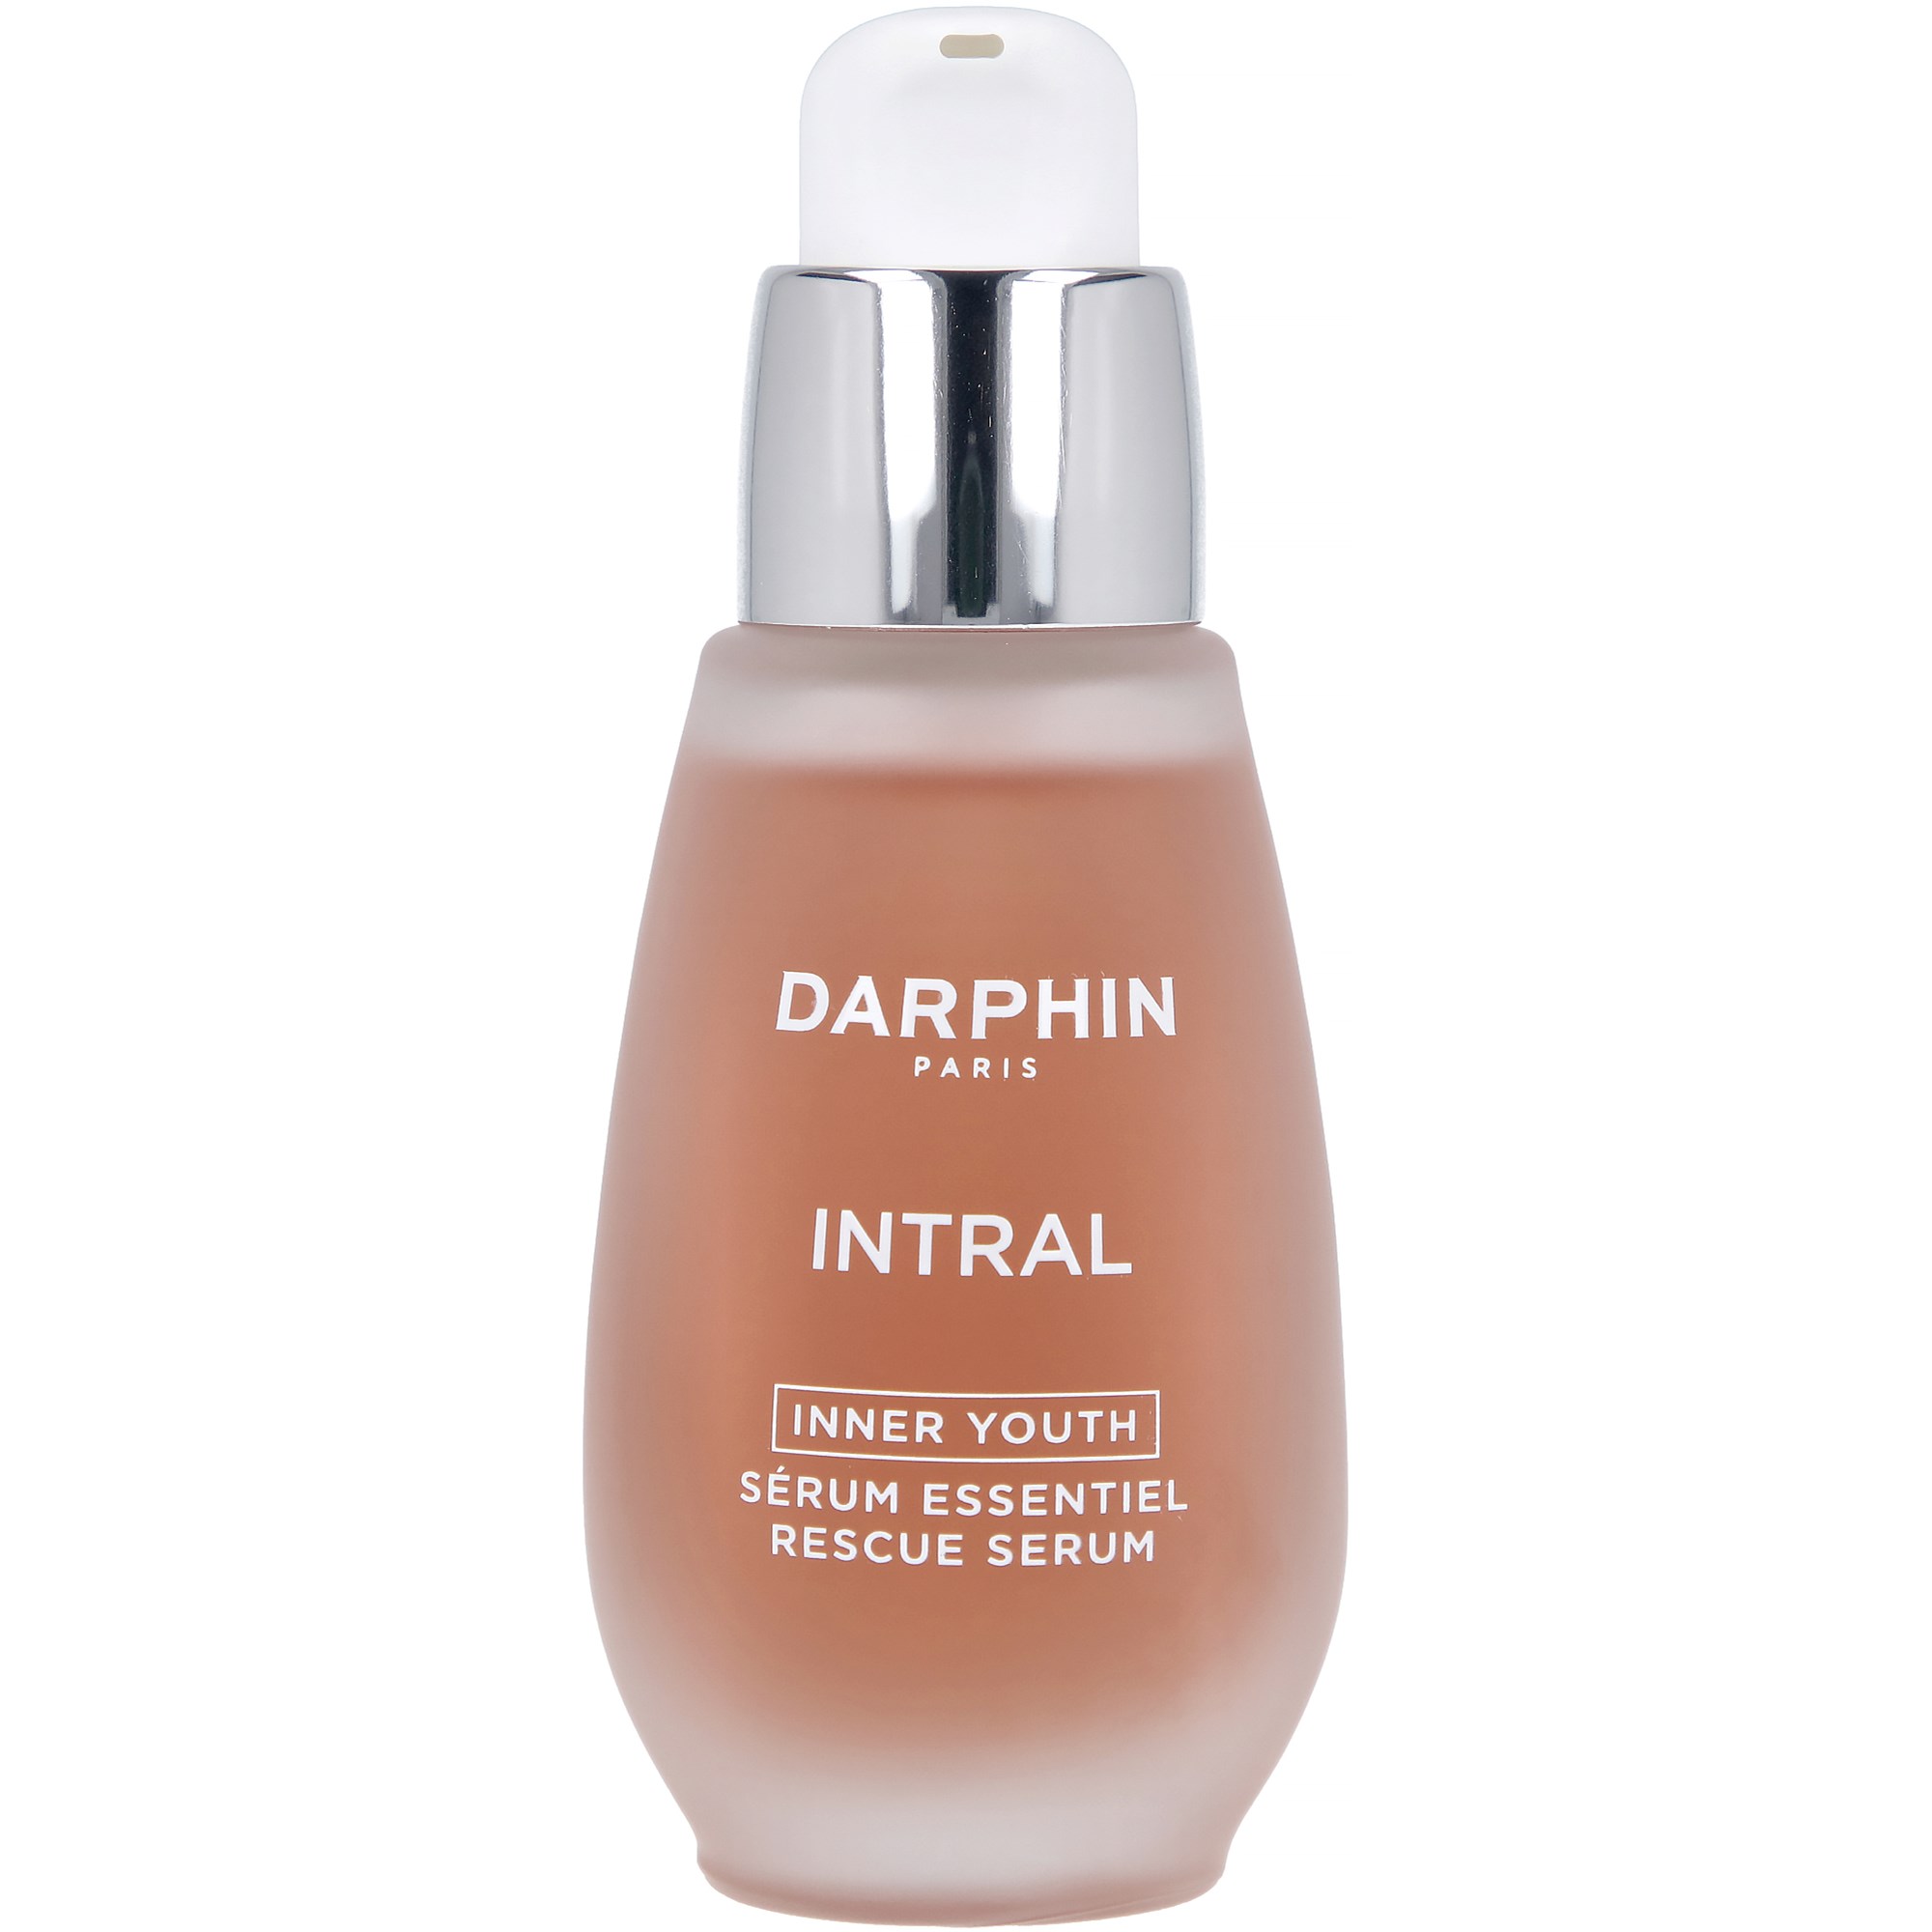 Darphin Intral Redness Relief Soothing Serum 30 ml